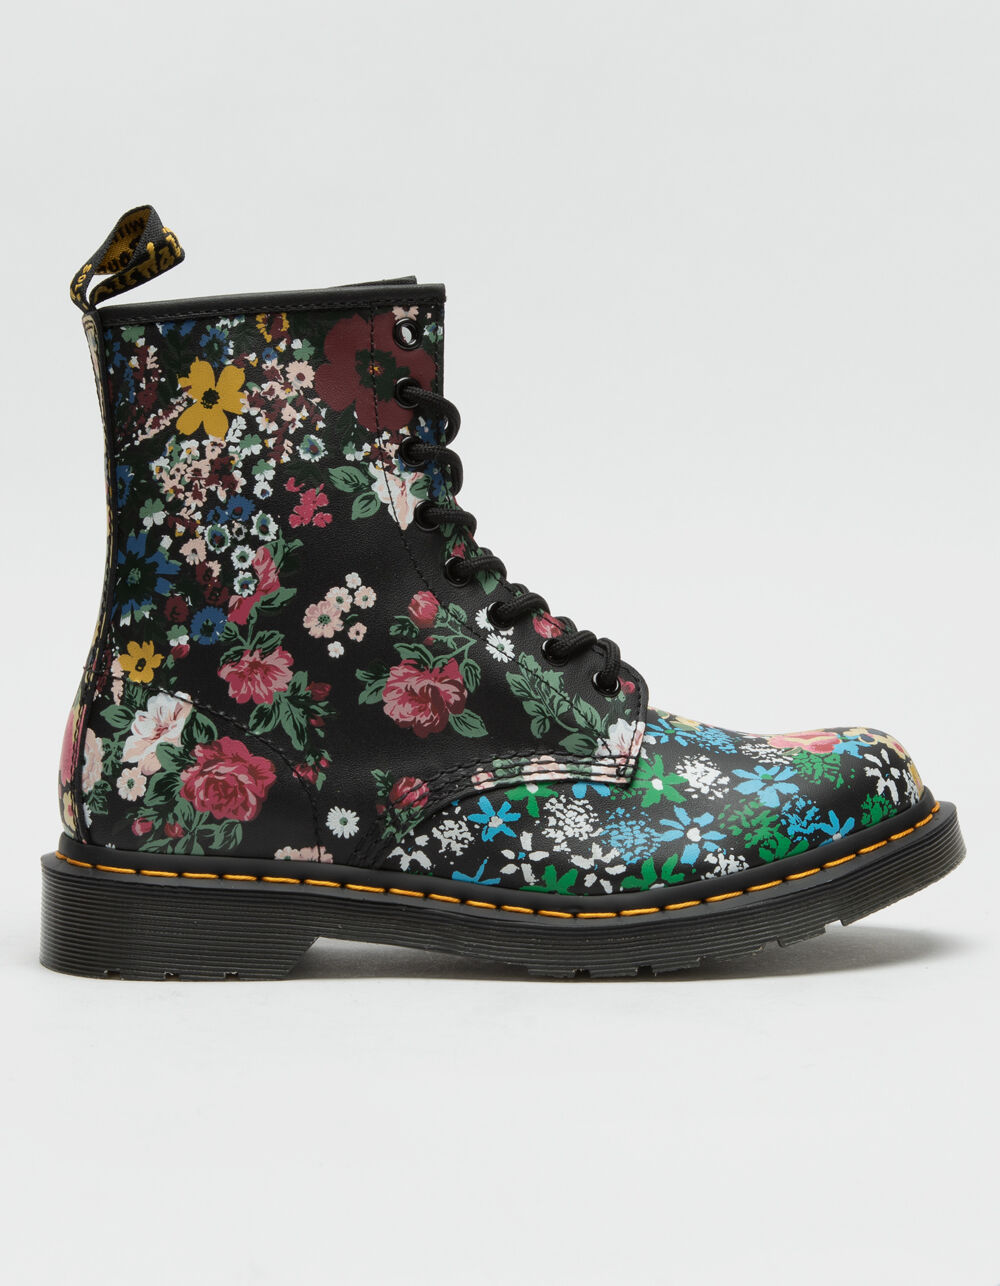 DR. MARTENS 1460 Pascal Floral Mash Up Leather Lace Up Womens Boots ...